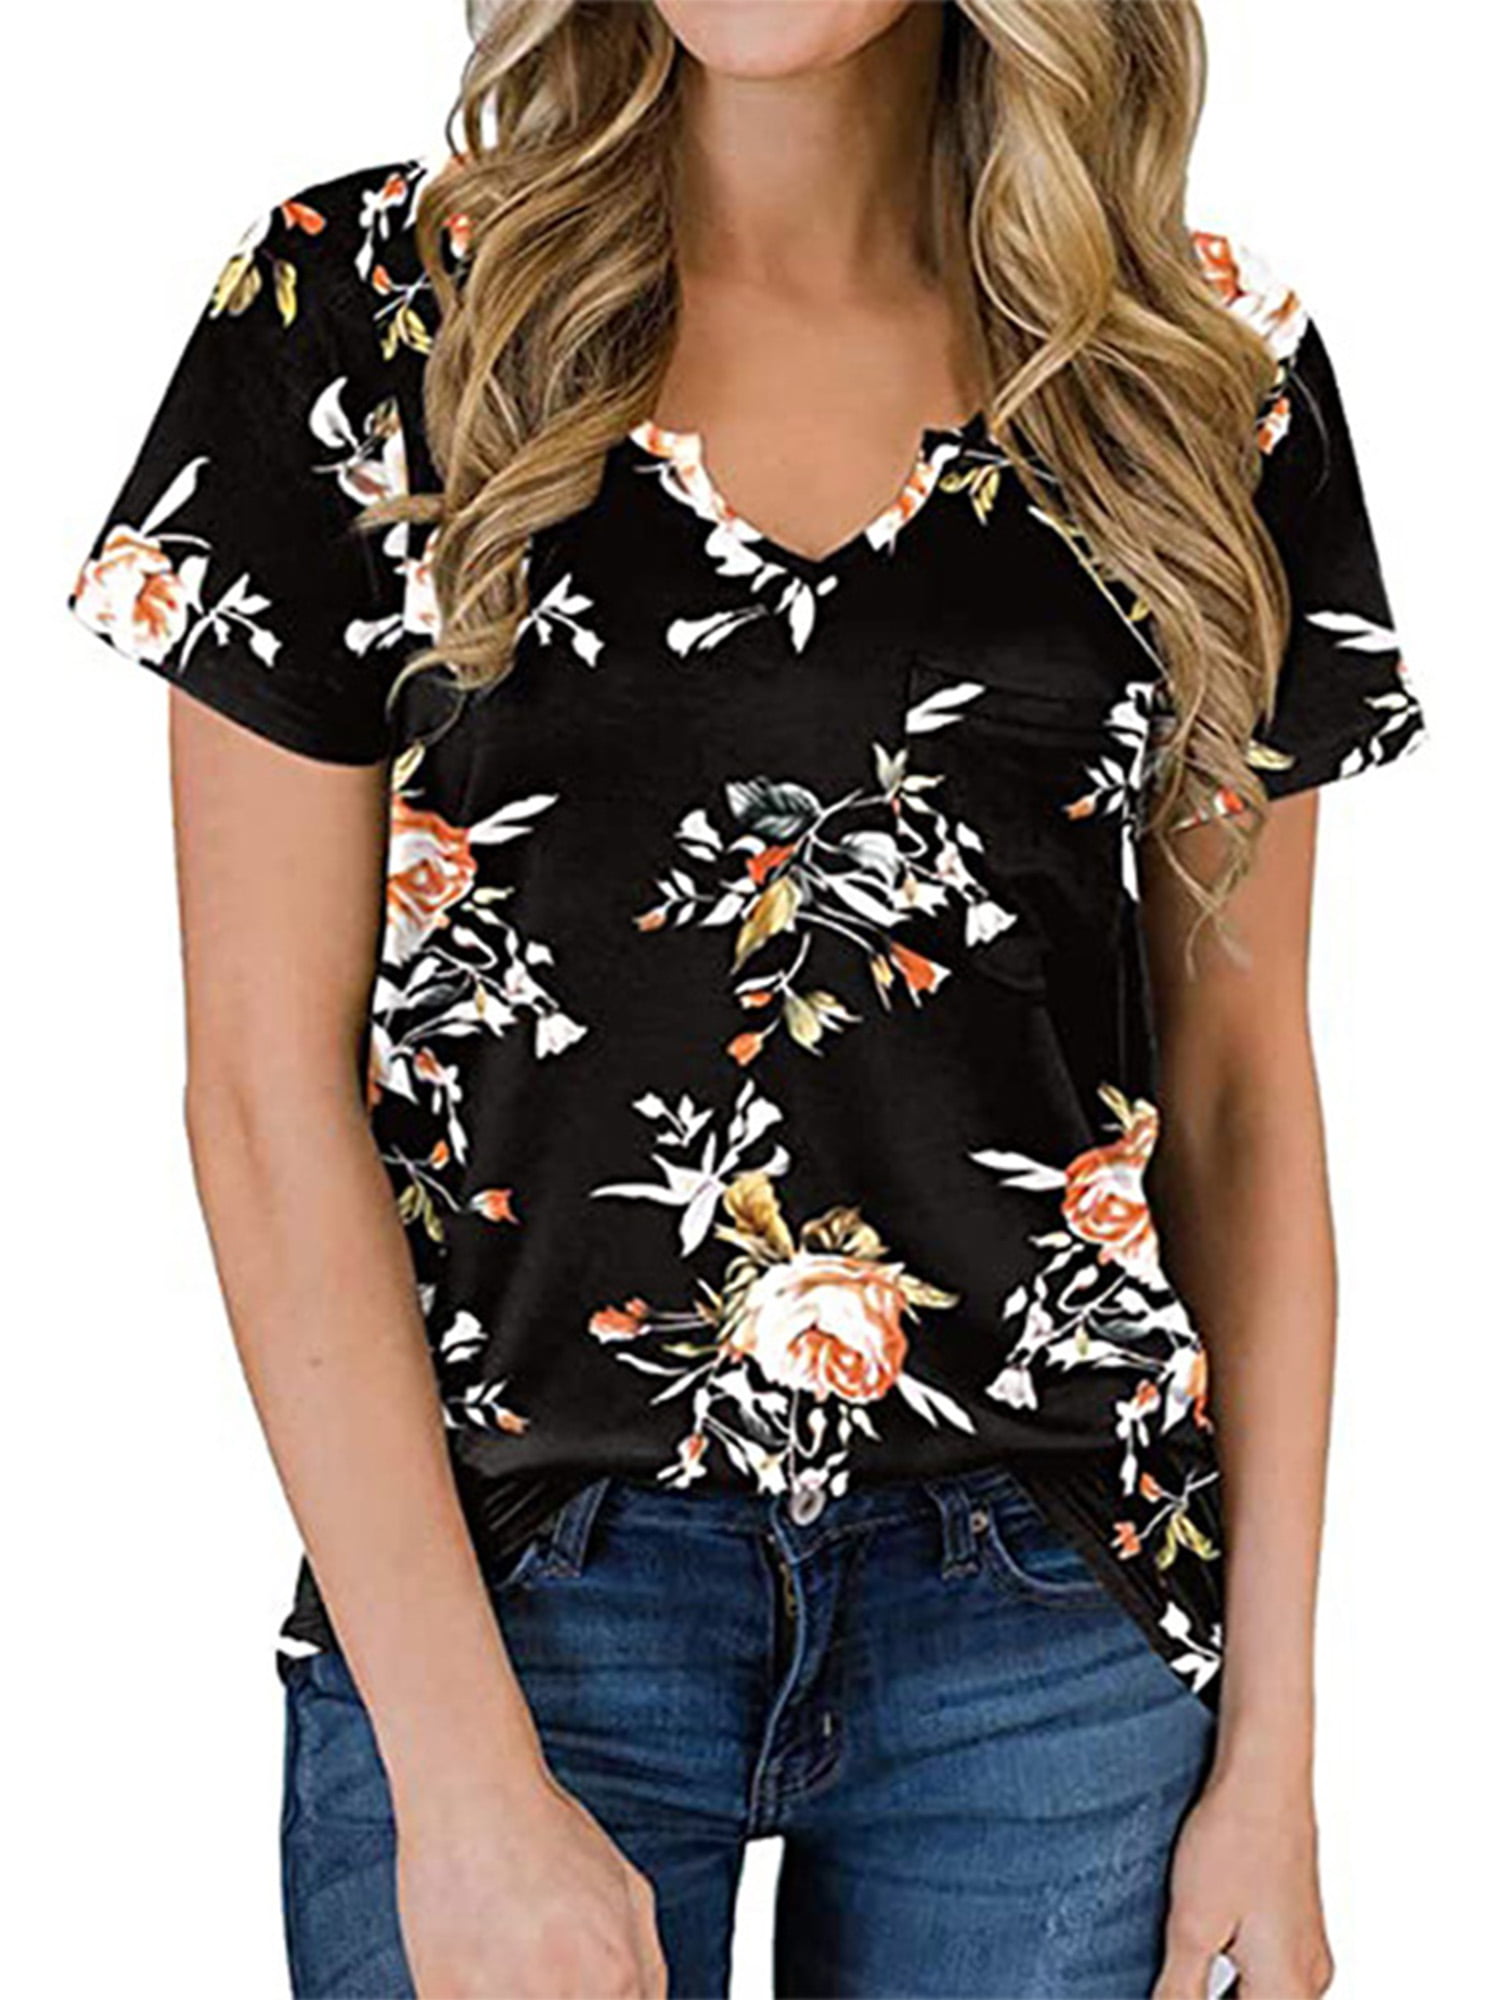 Womens V Neck Floral Button Shirt Ladies Summer Short Sleeve Blouse Tee T Shirts 